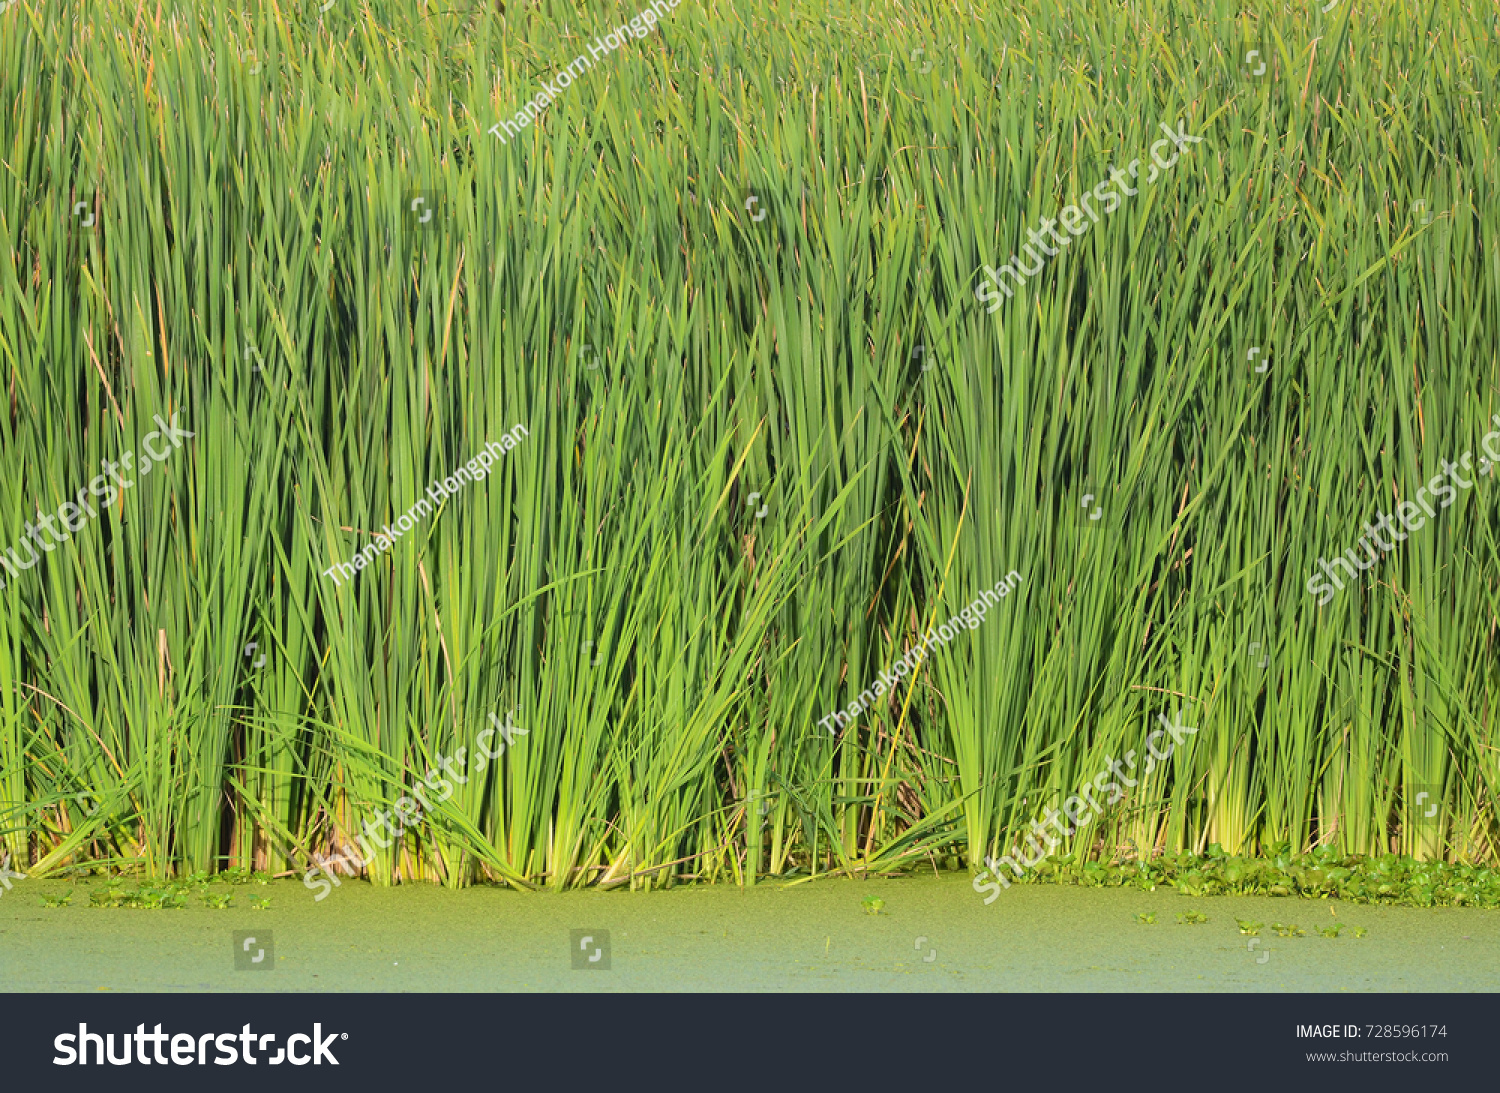 A lot of stems from green reeds. Unmatched reeds with long stems #728596174